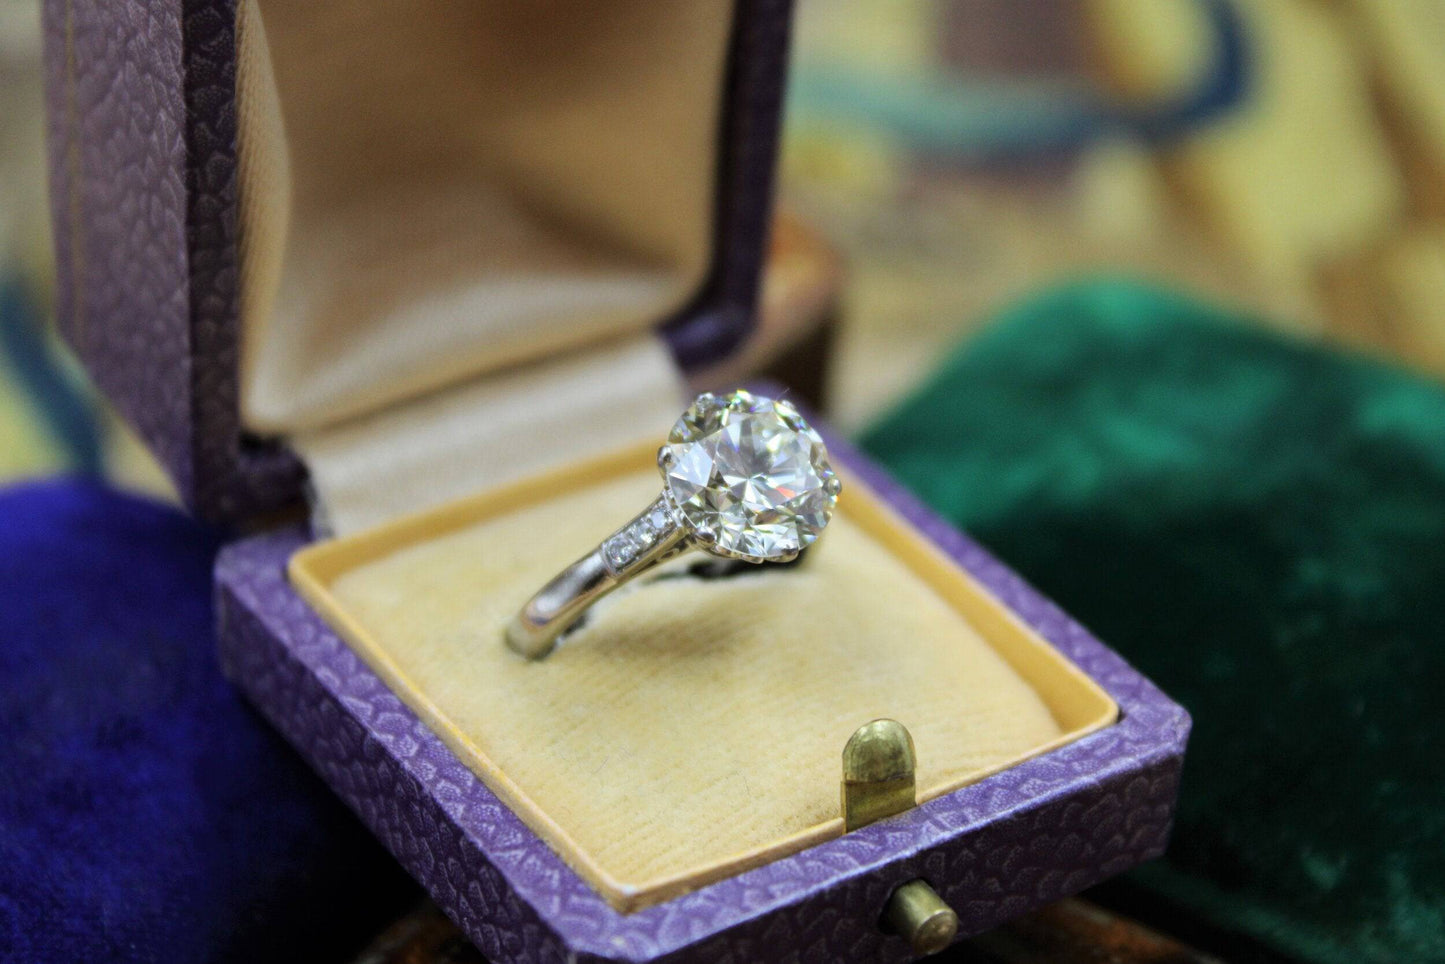 A 3.66 Carats Diamond Solitaire Ring mounted in Platinum, Circa 1950 - Robin Haydock Antiques